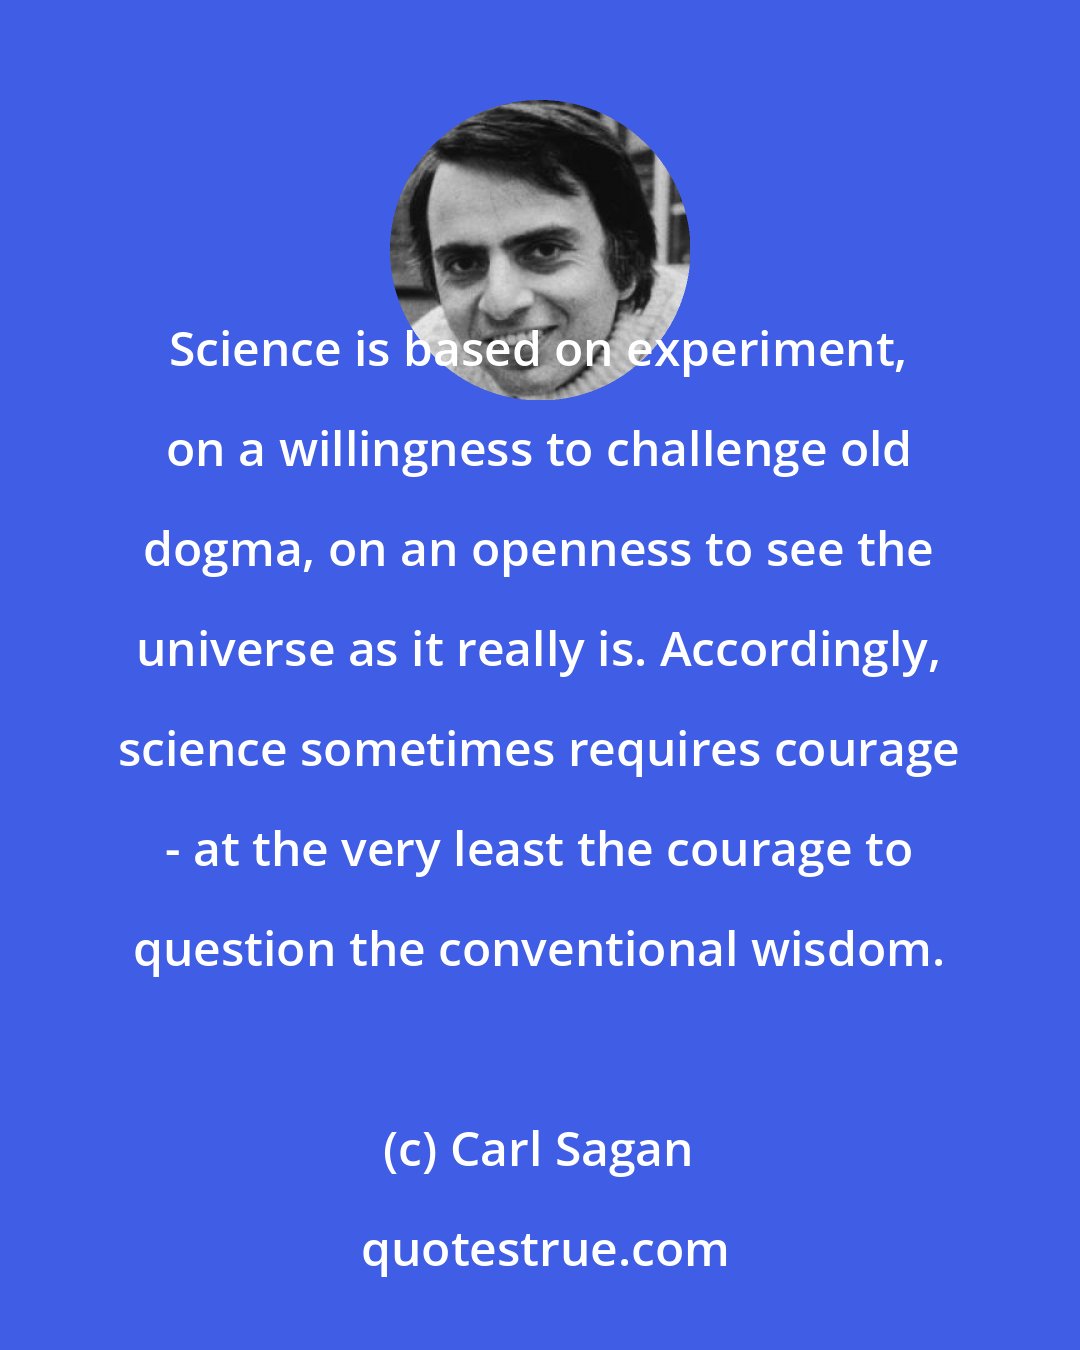 Carl Sagan: Science is based on experiment, on a willingness to challenge old dogma, on an openness to see the universe as it really is. Accordingly, science sometimes requires courage - at the very least the courage to question the conventional wisdom.